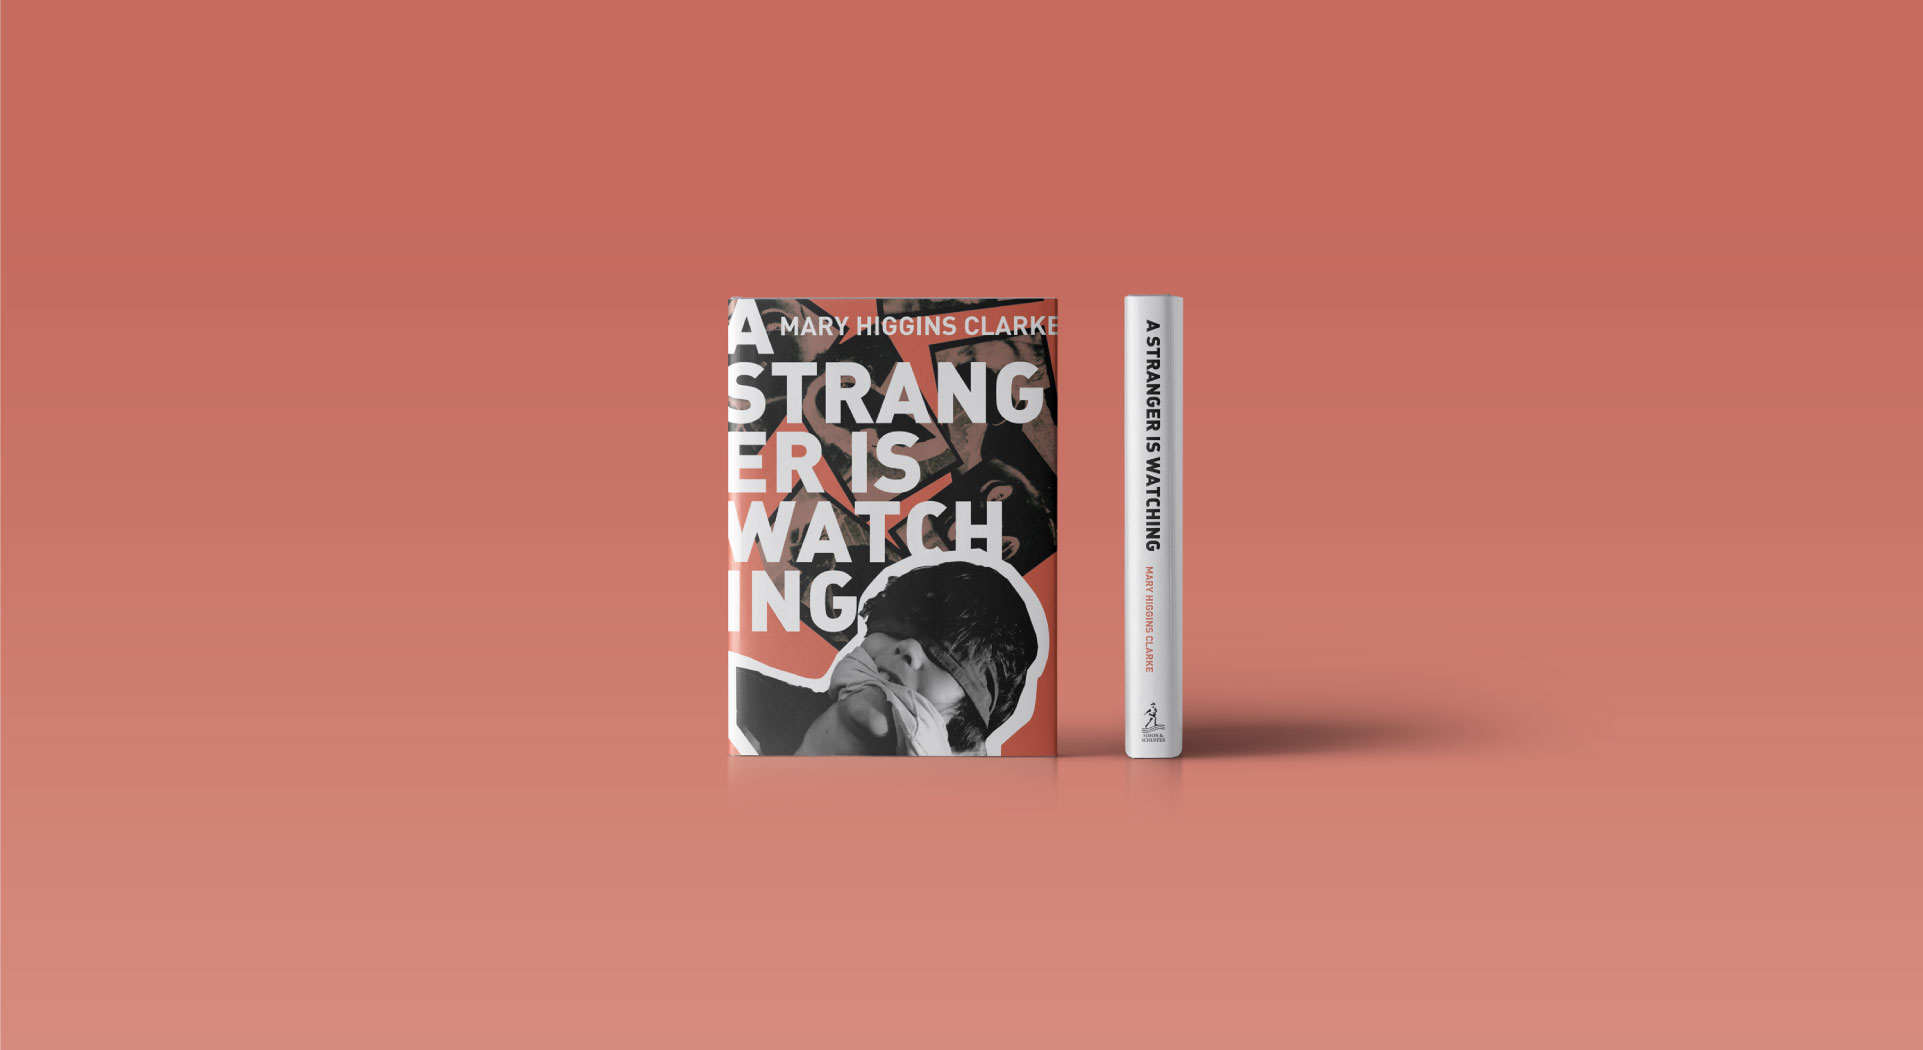 Red Bookcover for the book: A Stranger is Watching